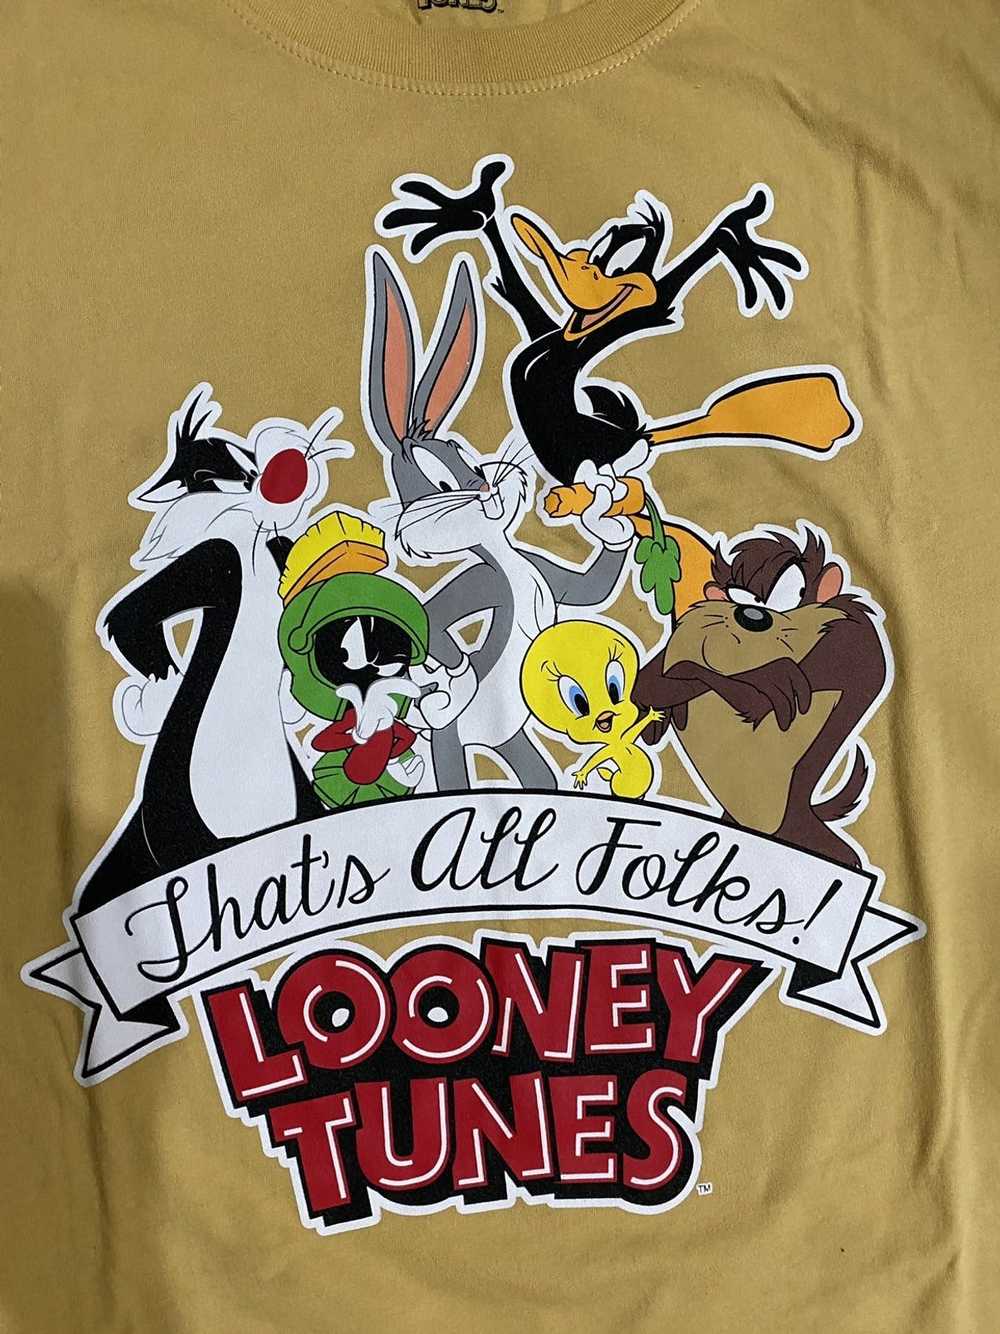 Vintage Looney Tunes “That’s all folks” - image 1